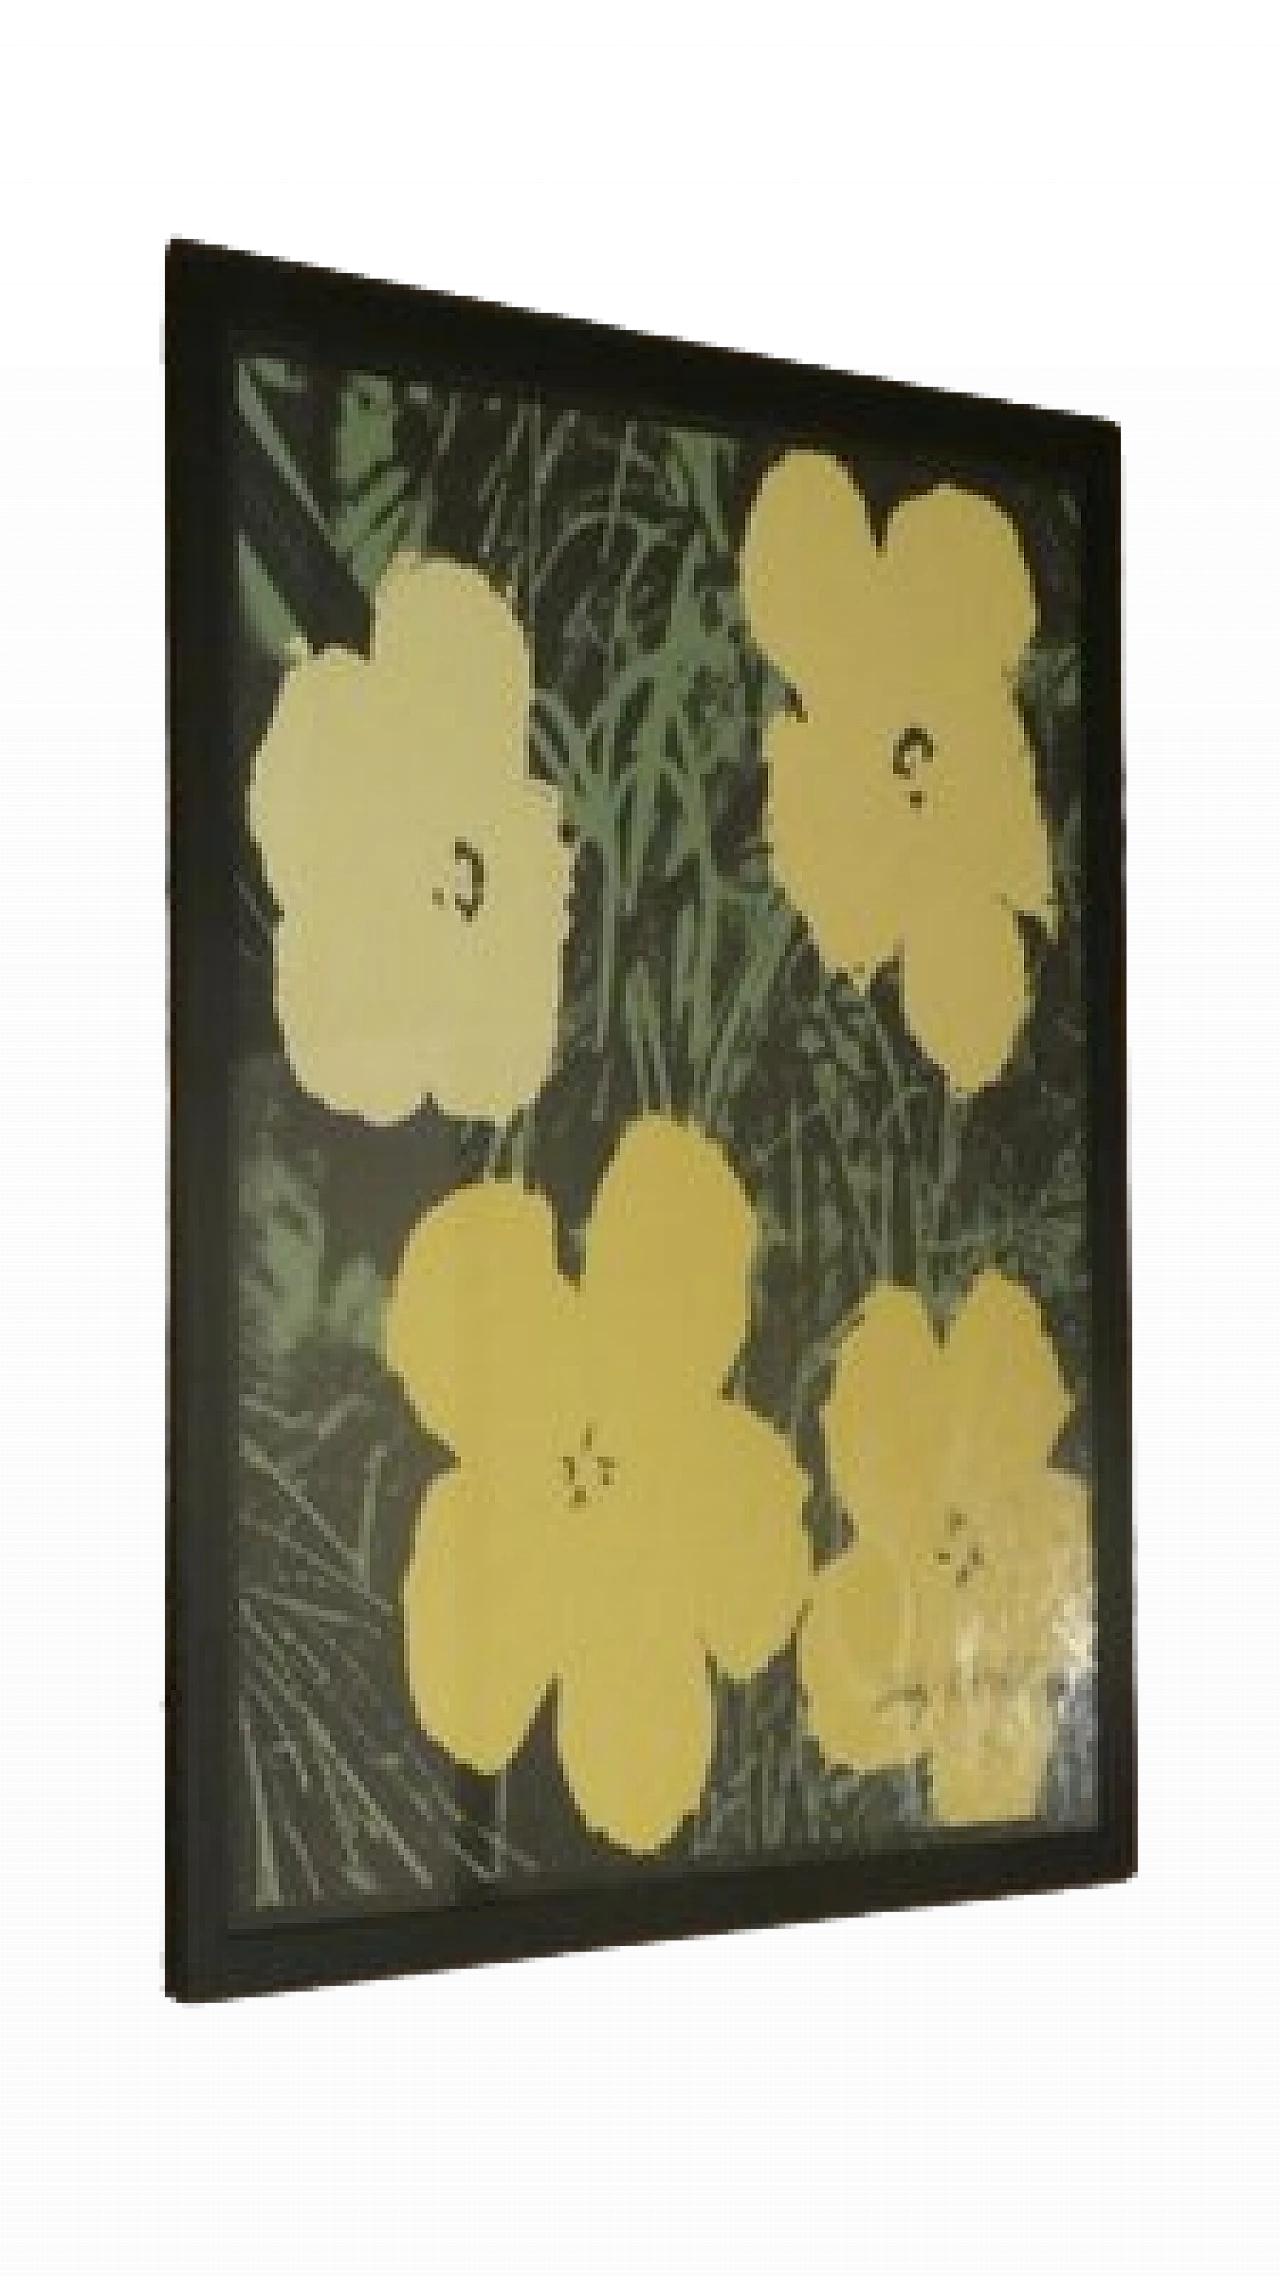 Andy Warhol, Flowers 2238/2400, lithograph, 1964 9